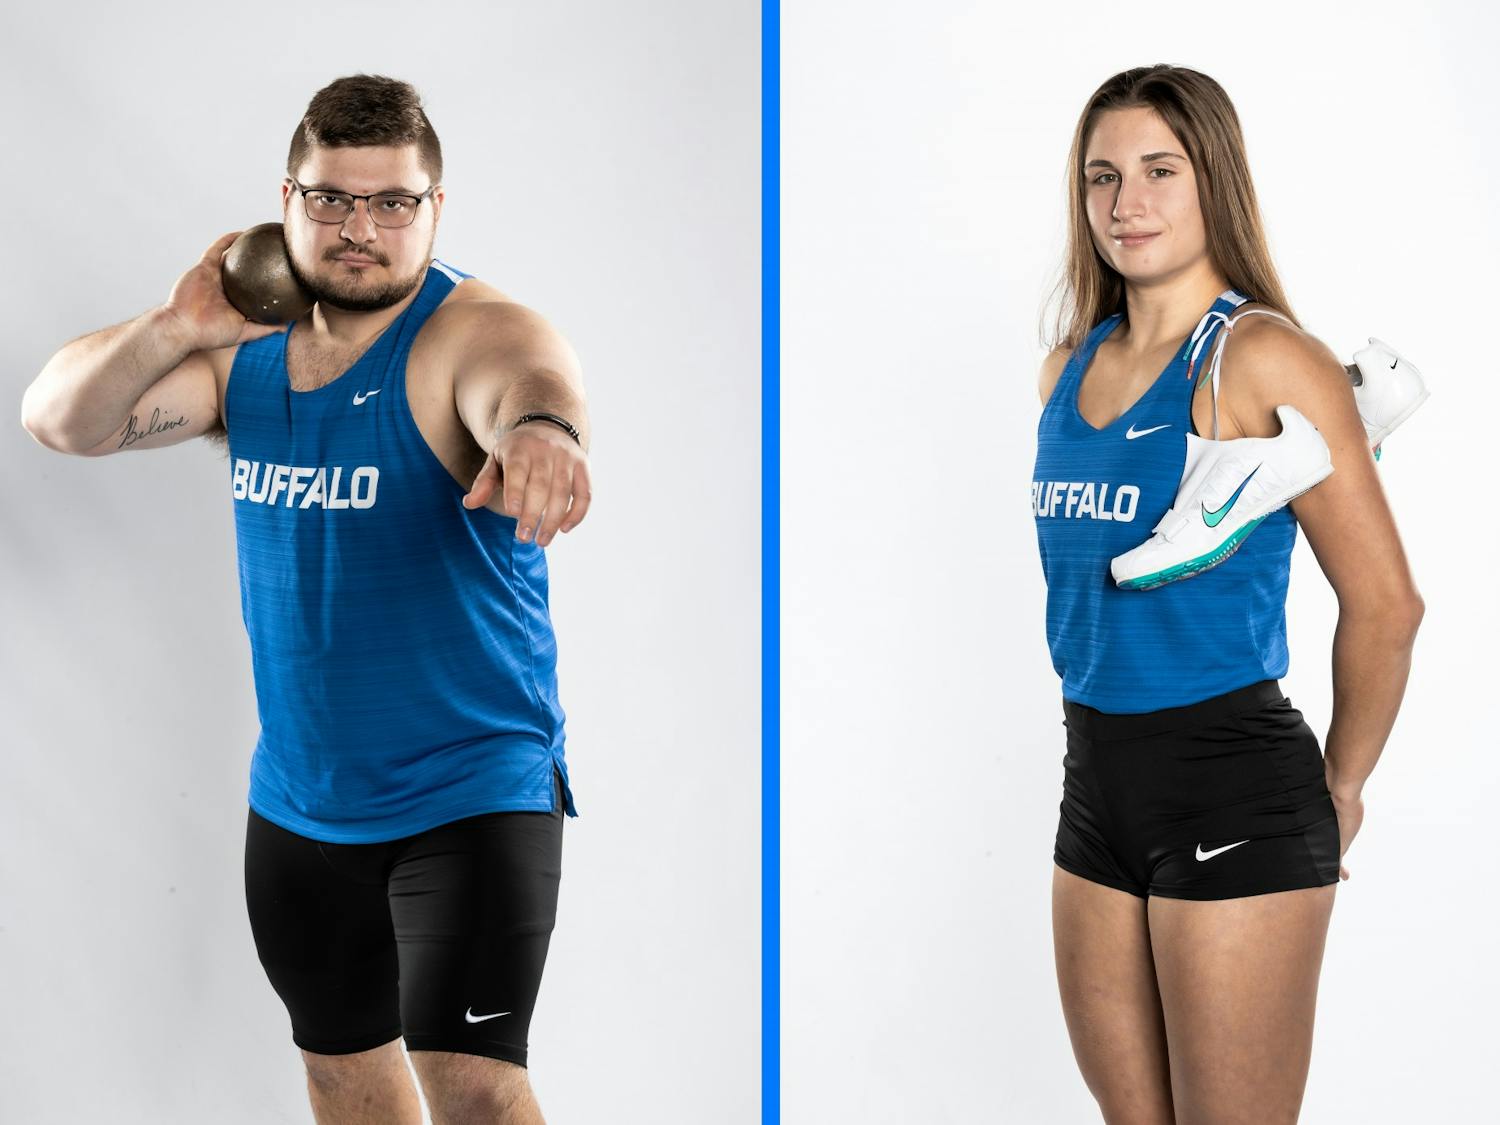 Jonathan Surdej (left) and Christina Wende (right) both won gold medals at the indoor track and field MAC Championships.&nbsp;